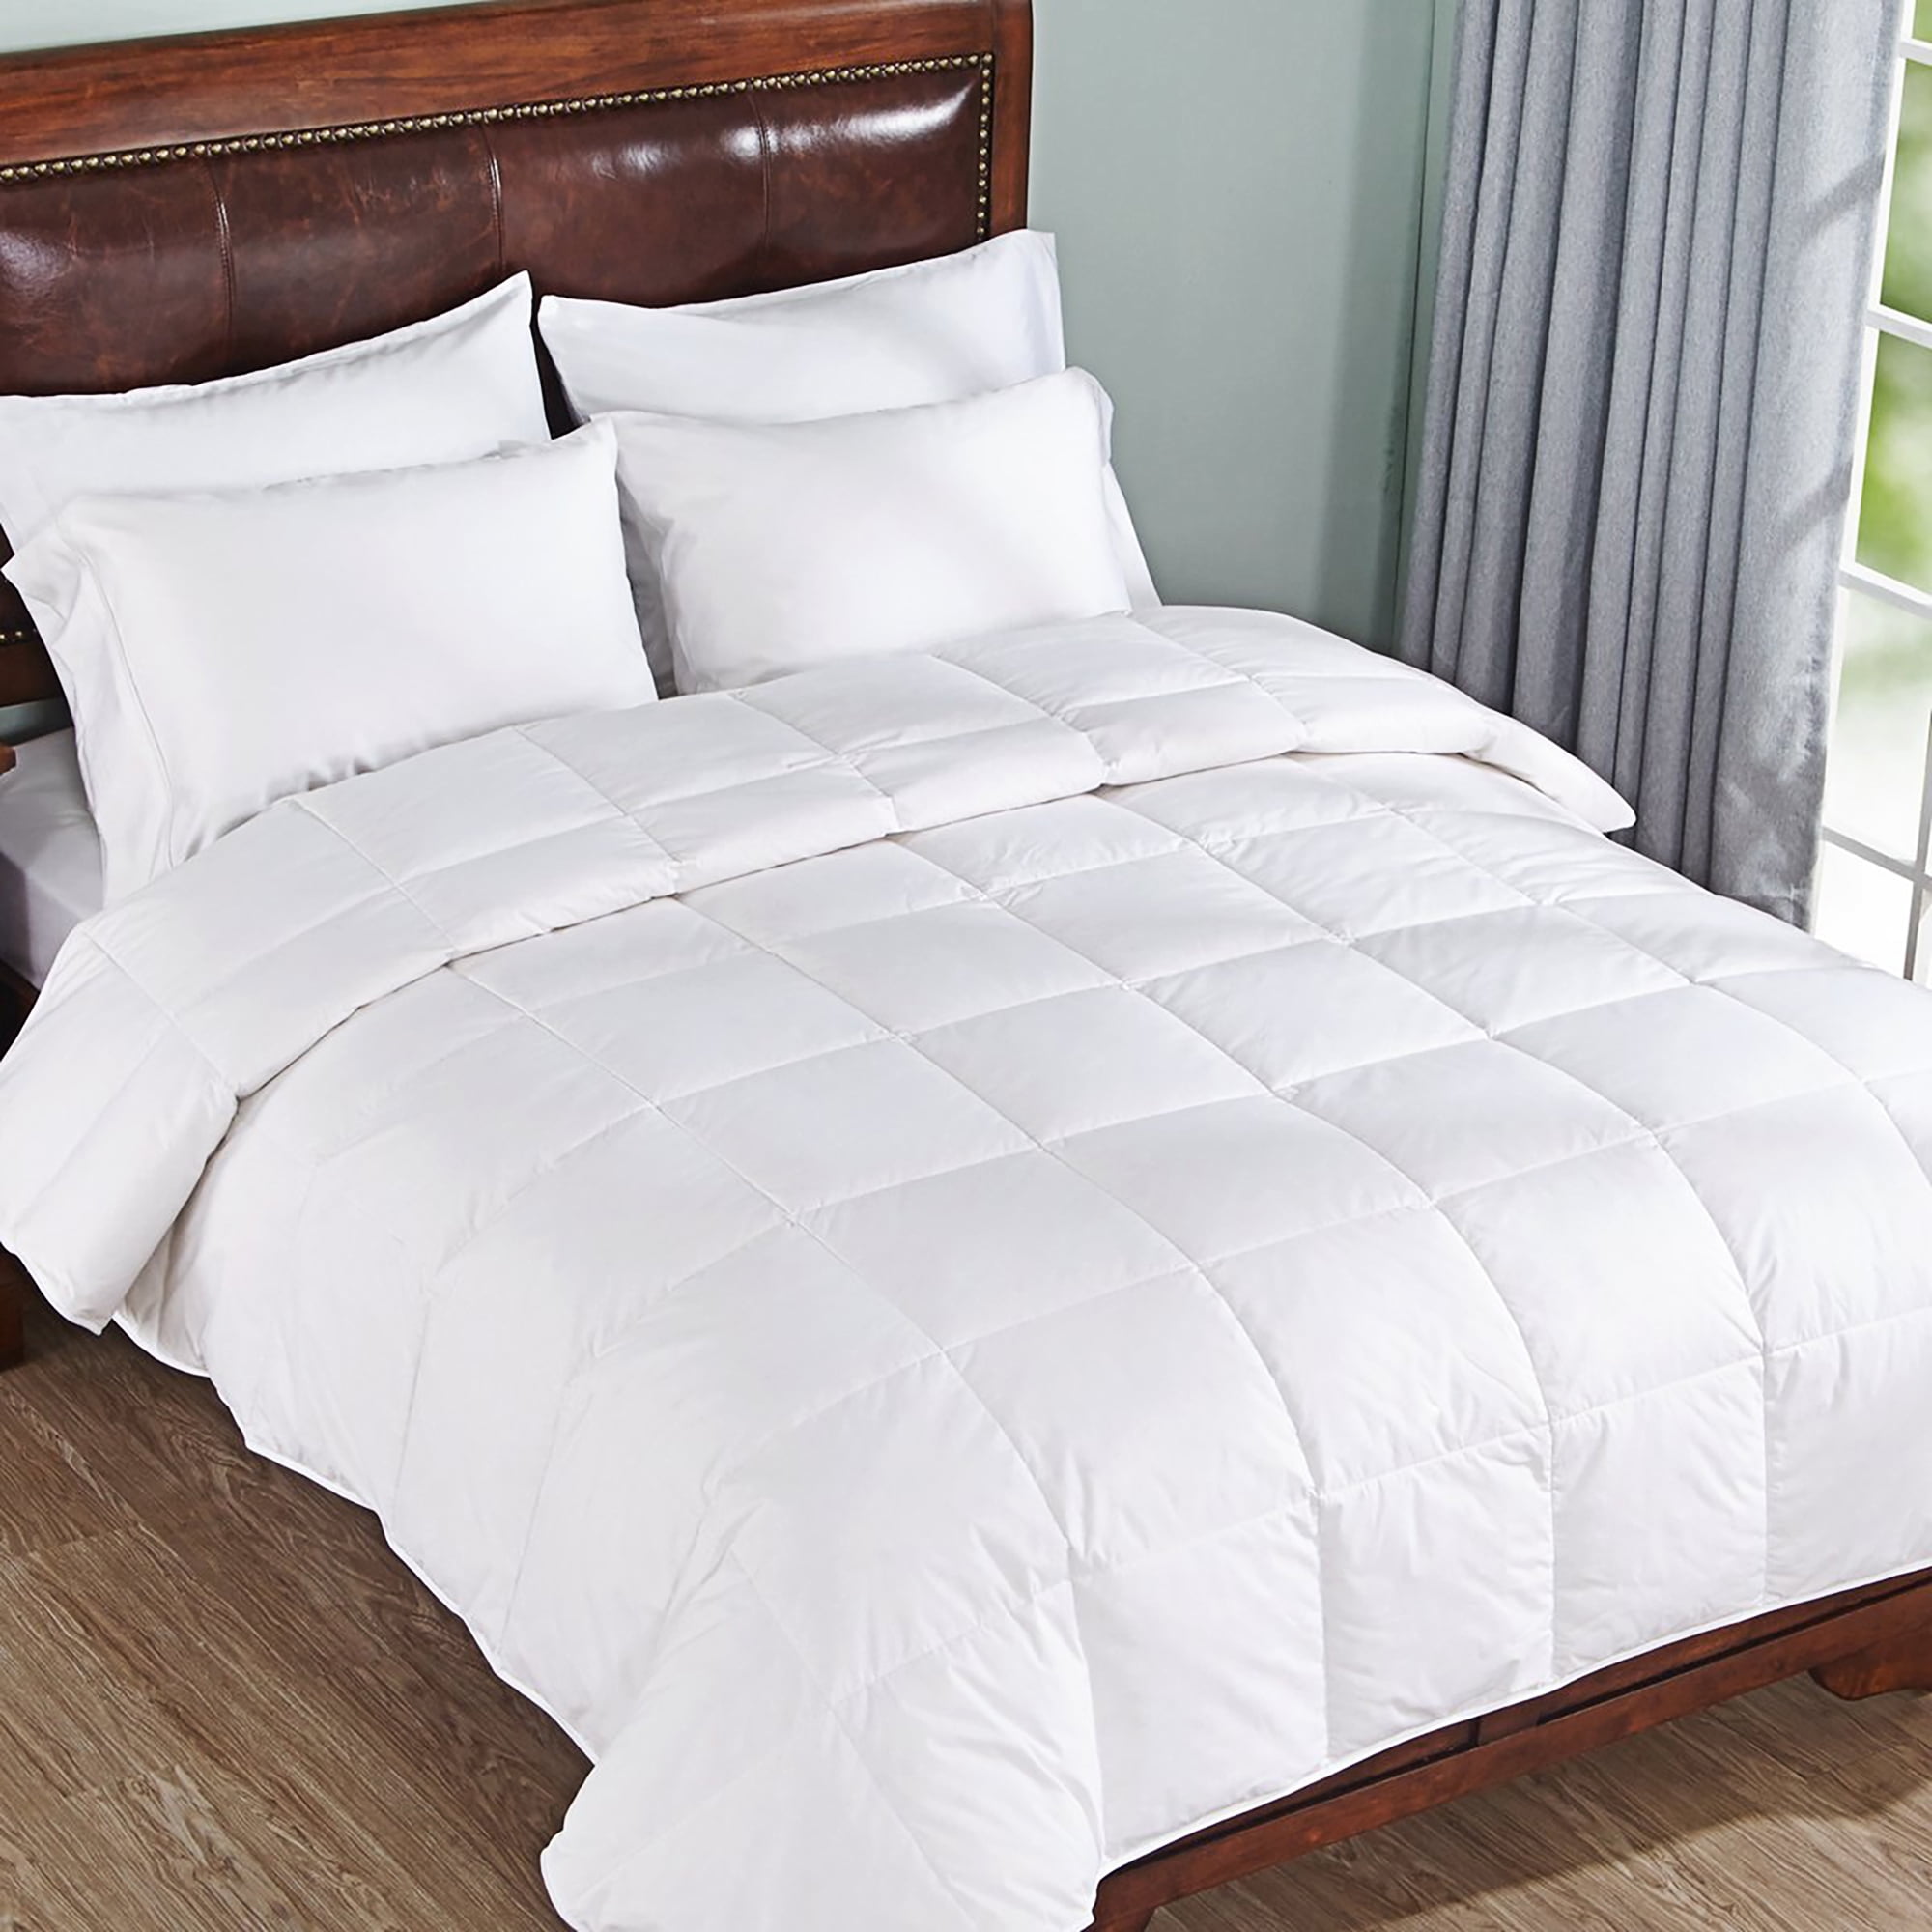 Easy Plants 10.5Tog Single Complete Bed Set Polyester Cotton Lightweight White Duvet Pillow 